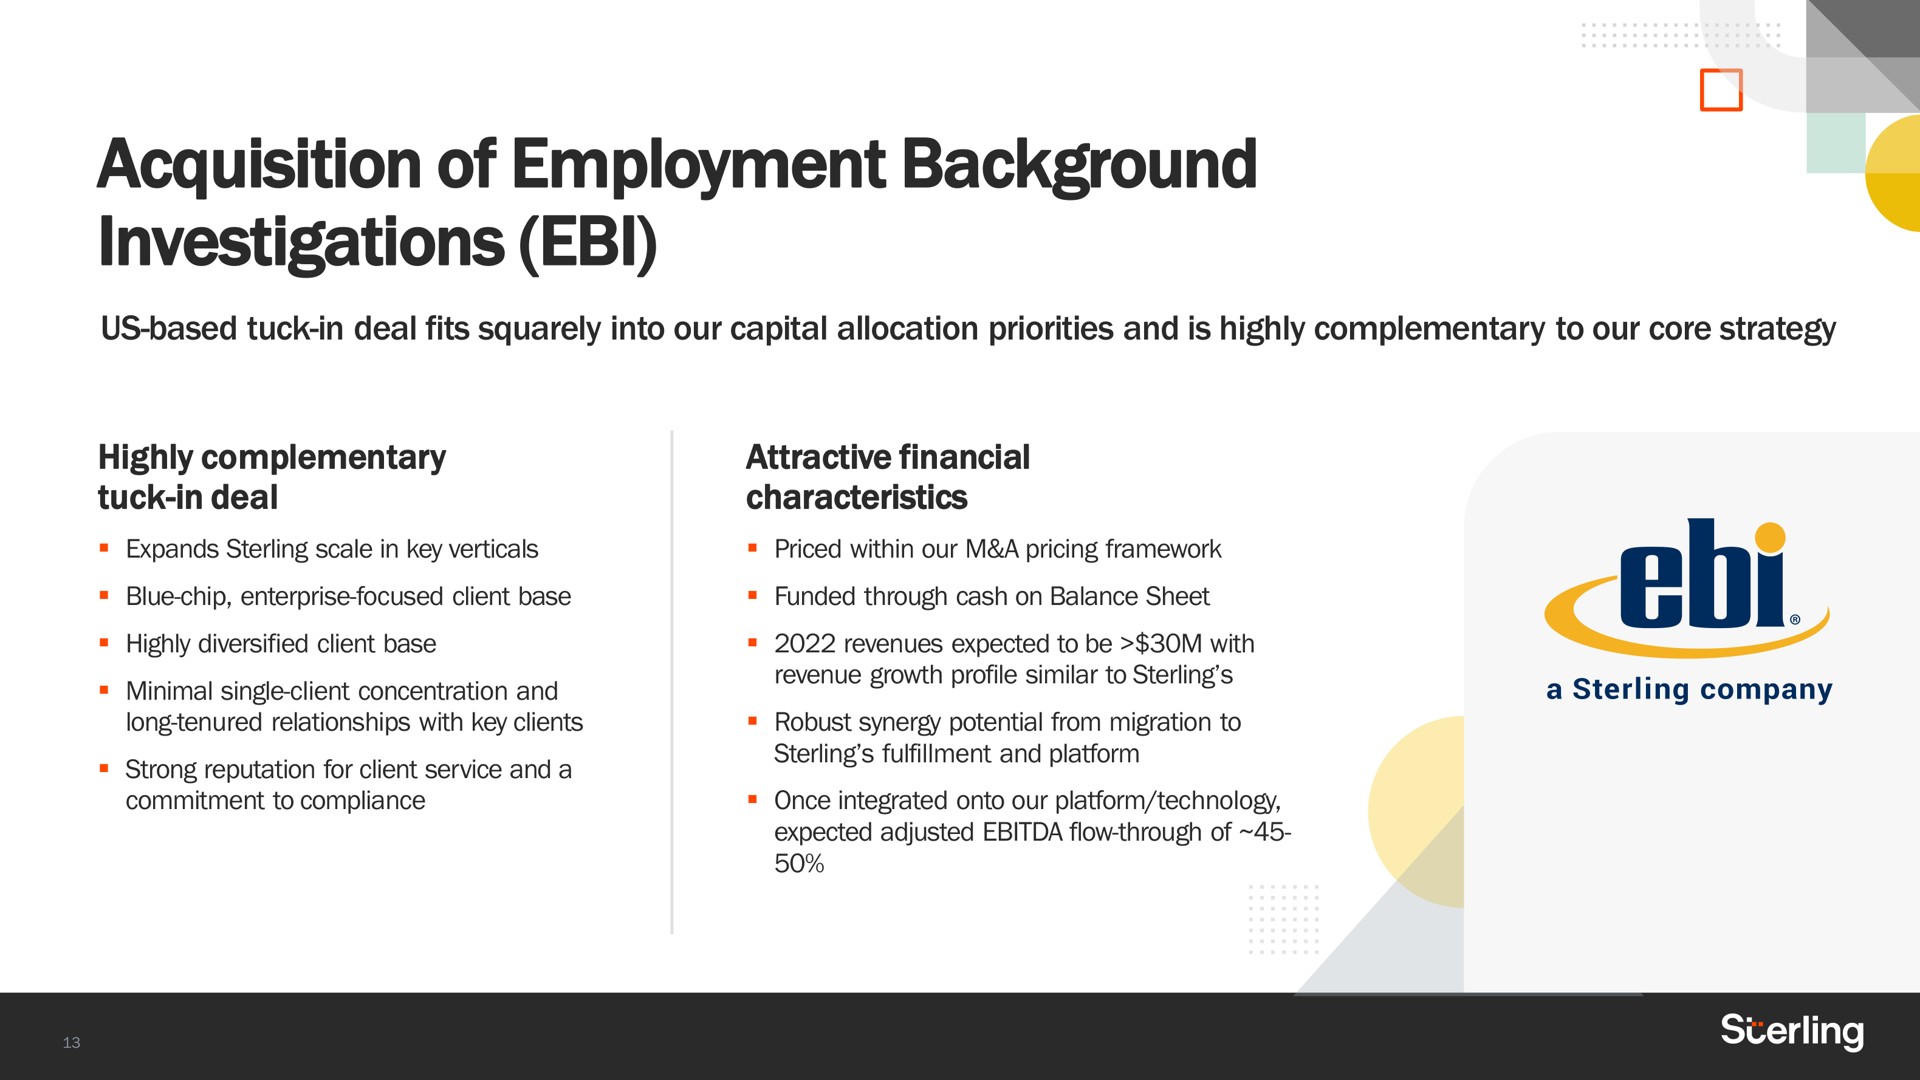 acquisition of employment background investigations us based tuck in deal fits squarely into our capital allocation priorities and is highly complementary to our core strategy highly complementary tuck in deal attractive financial characteristics | Sterling